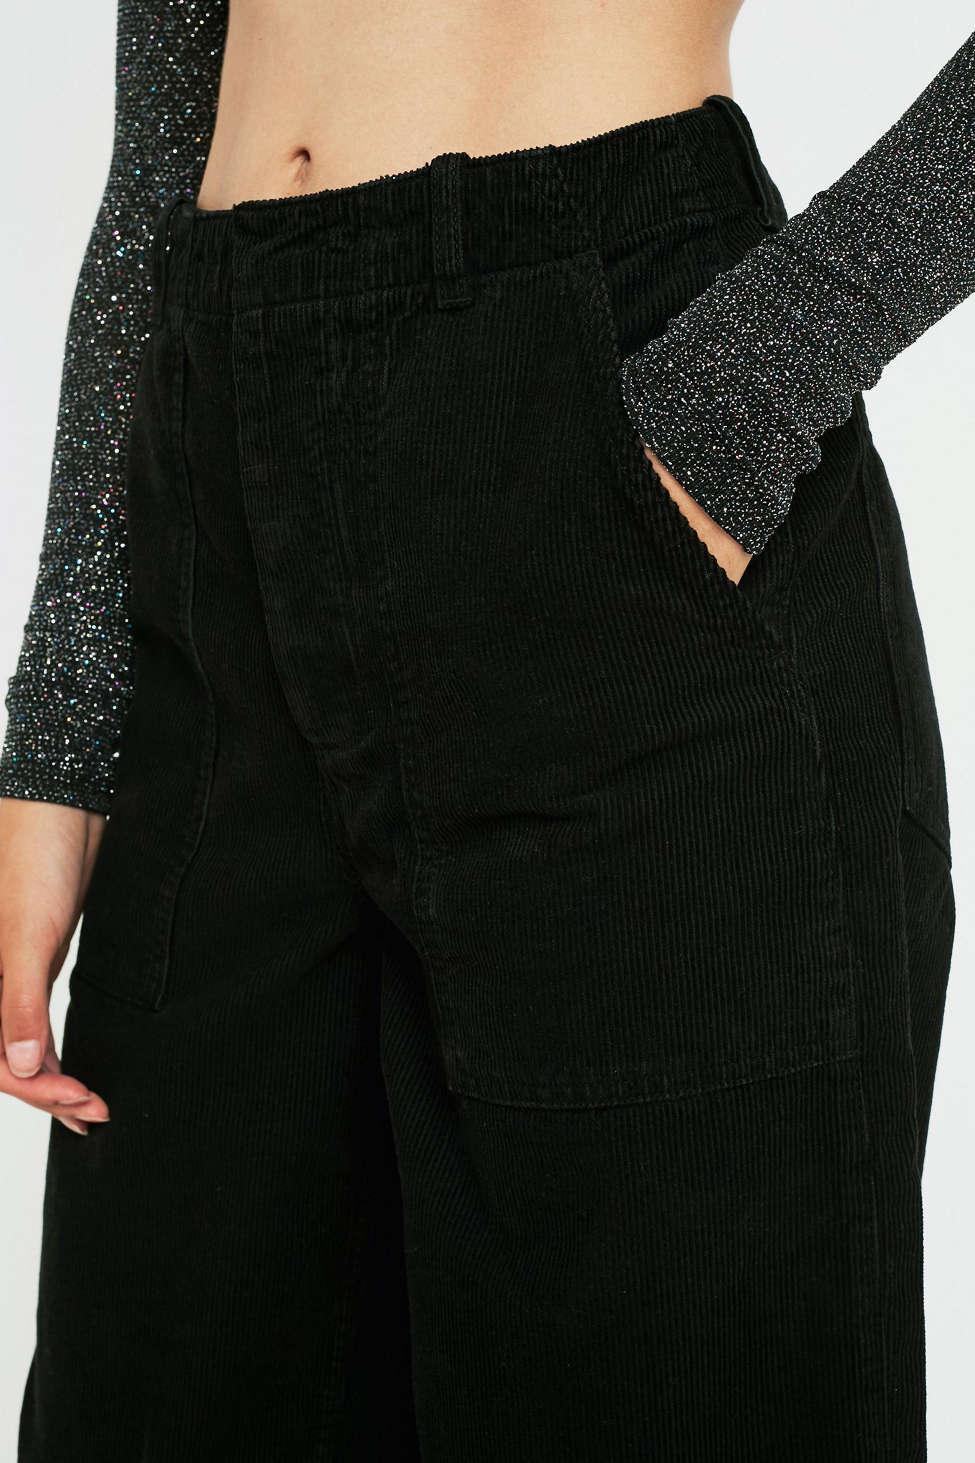 Urban Outfitters Uo Corduroy Workwear Puddle Pant in Black - Lyst